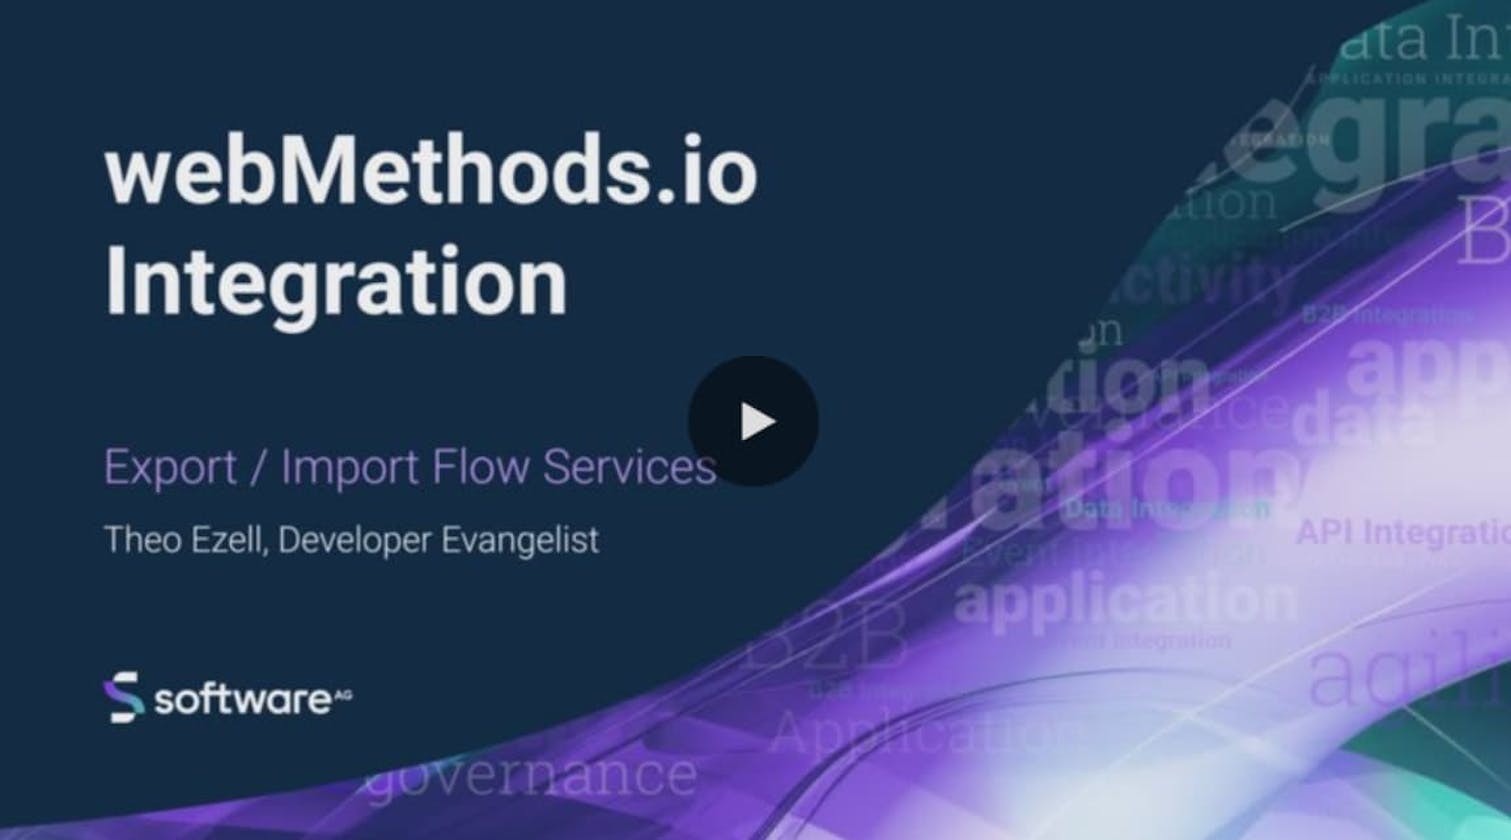 Export and import Flow services with webMethods.io Integration